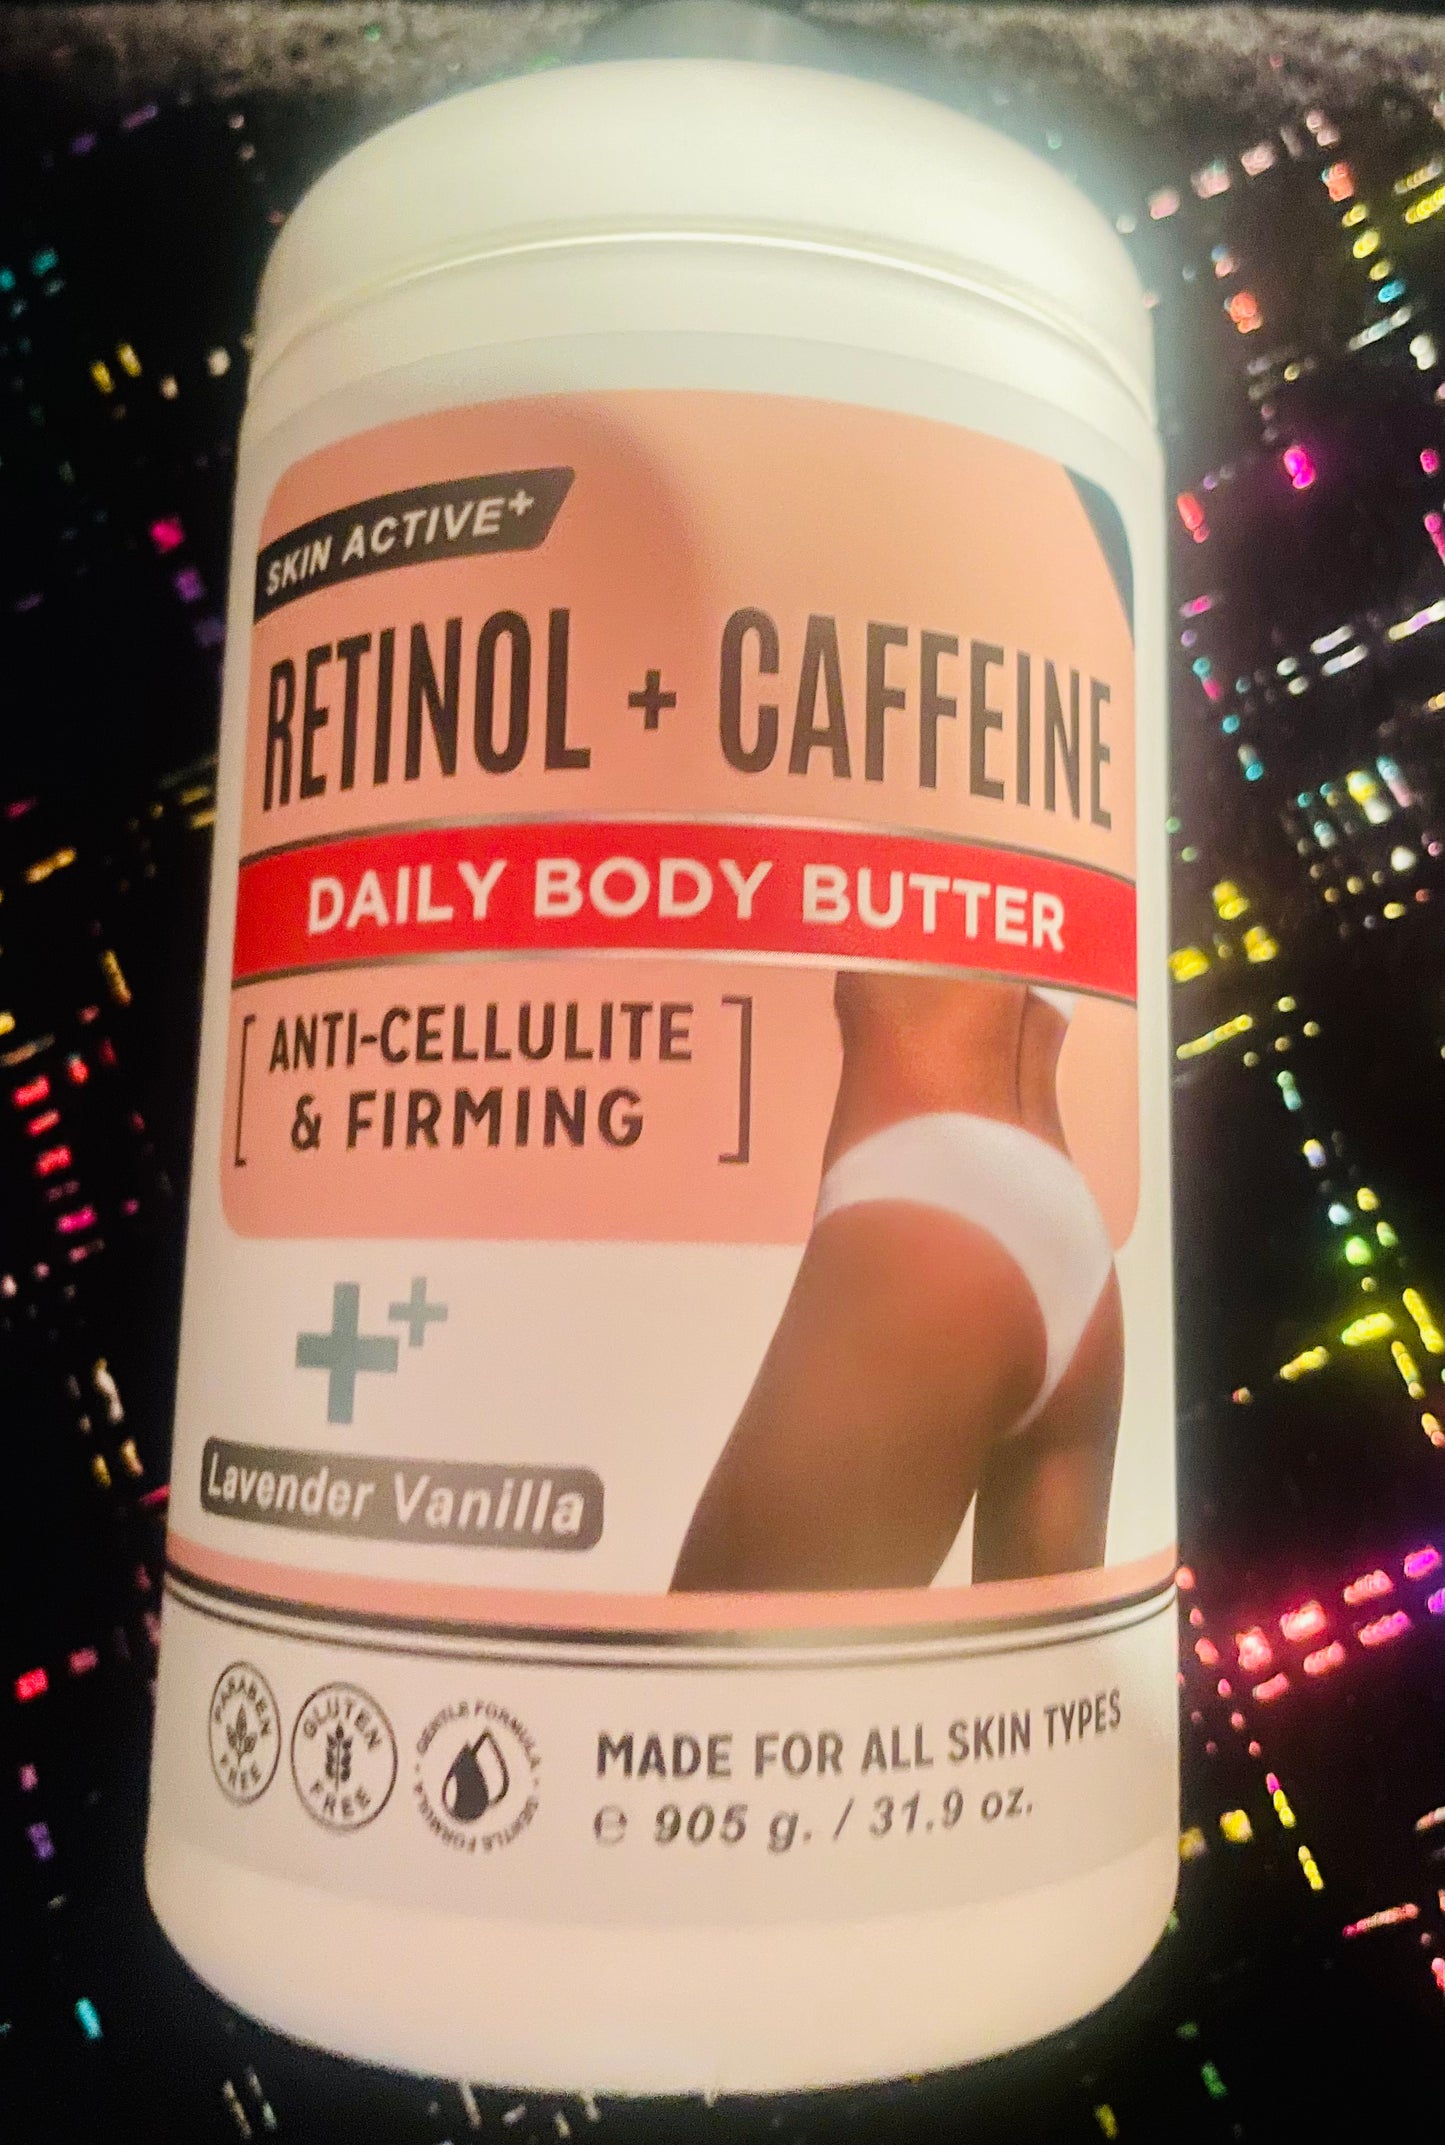 Cellulite & Firming Daily Body Butter